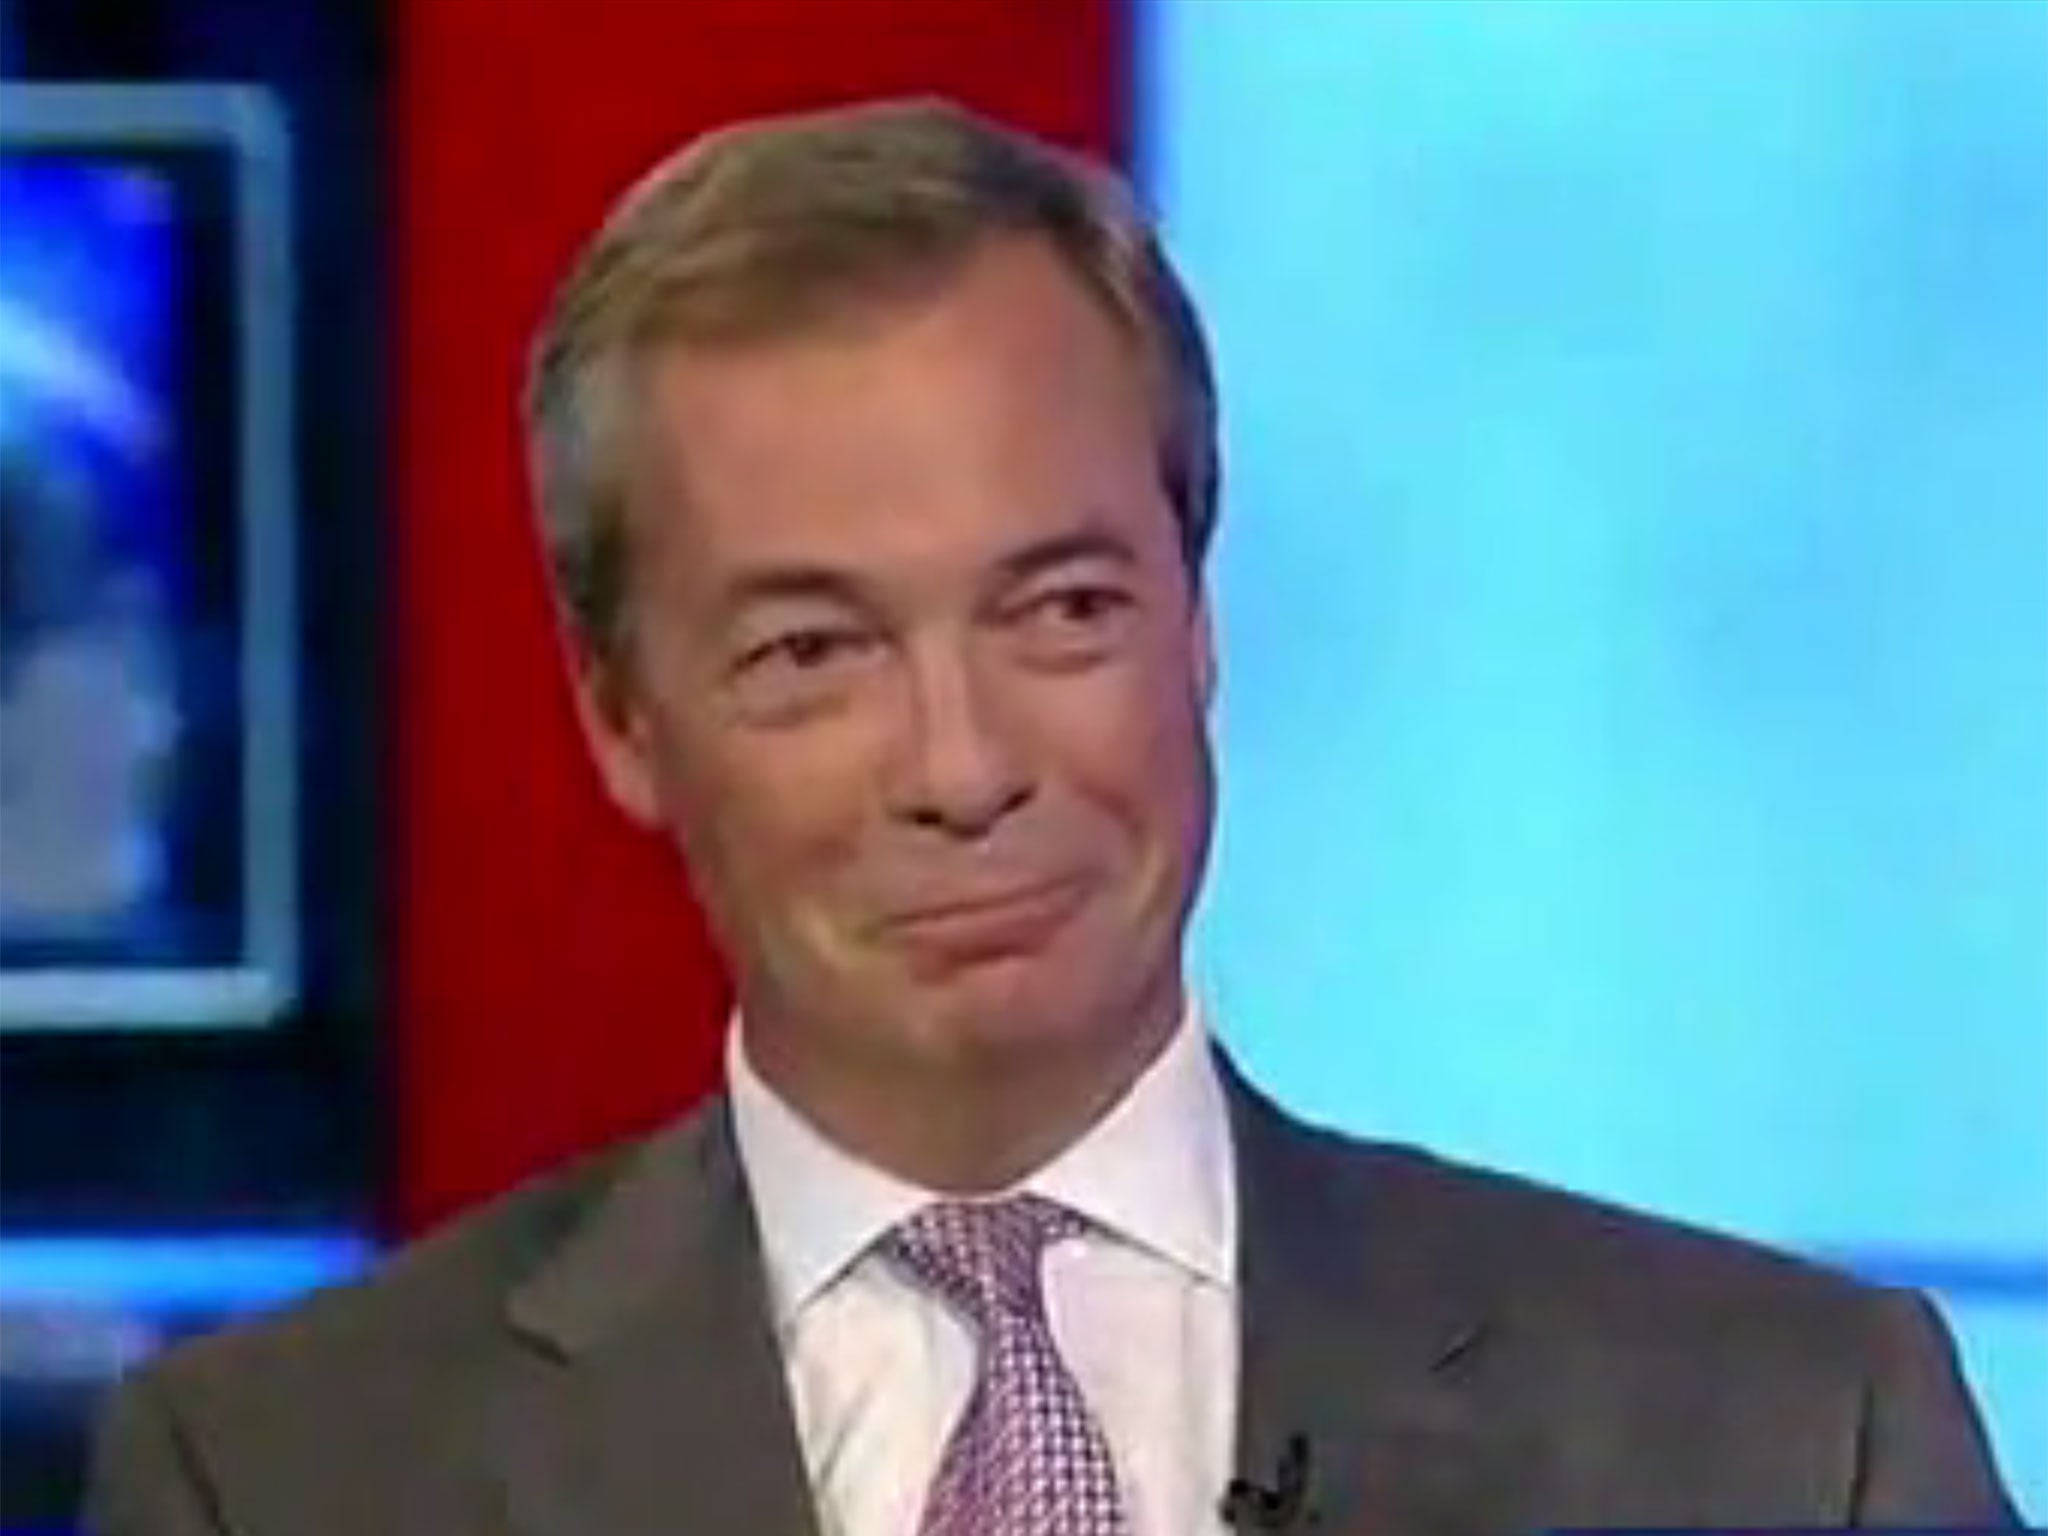 Nigel Farage tells Fox News Britain needs to stand up for its 'Judeo-Christian' values to combat homegrown militants